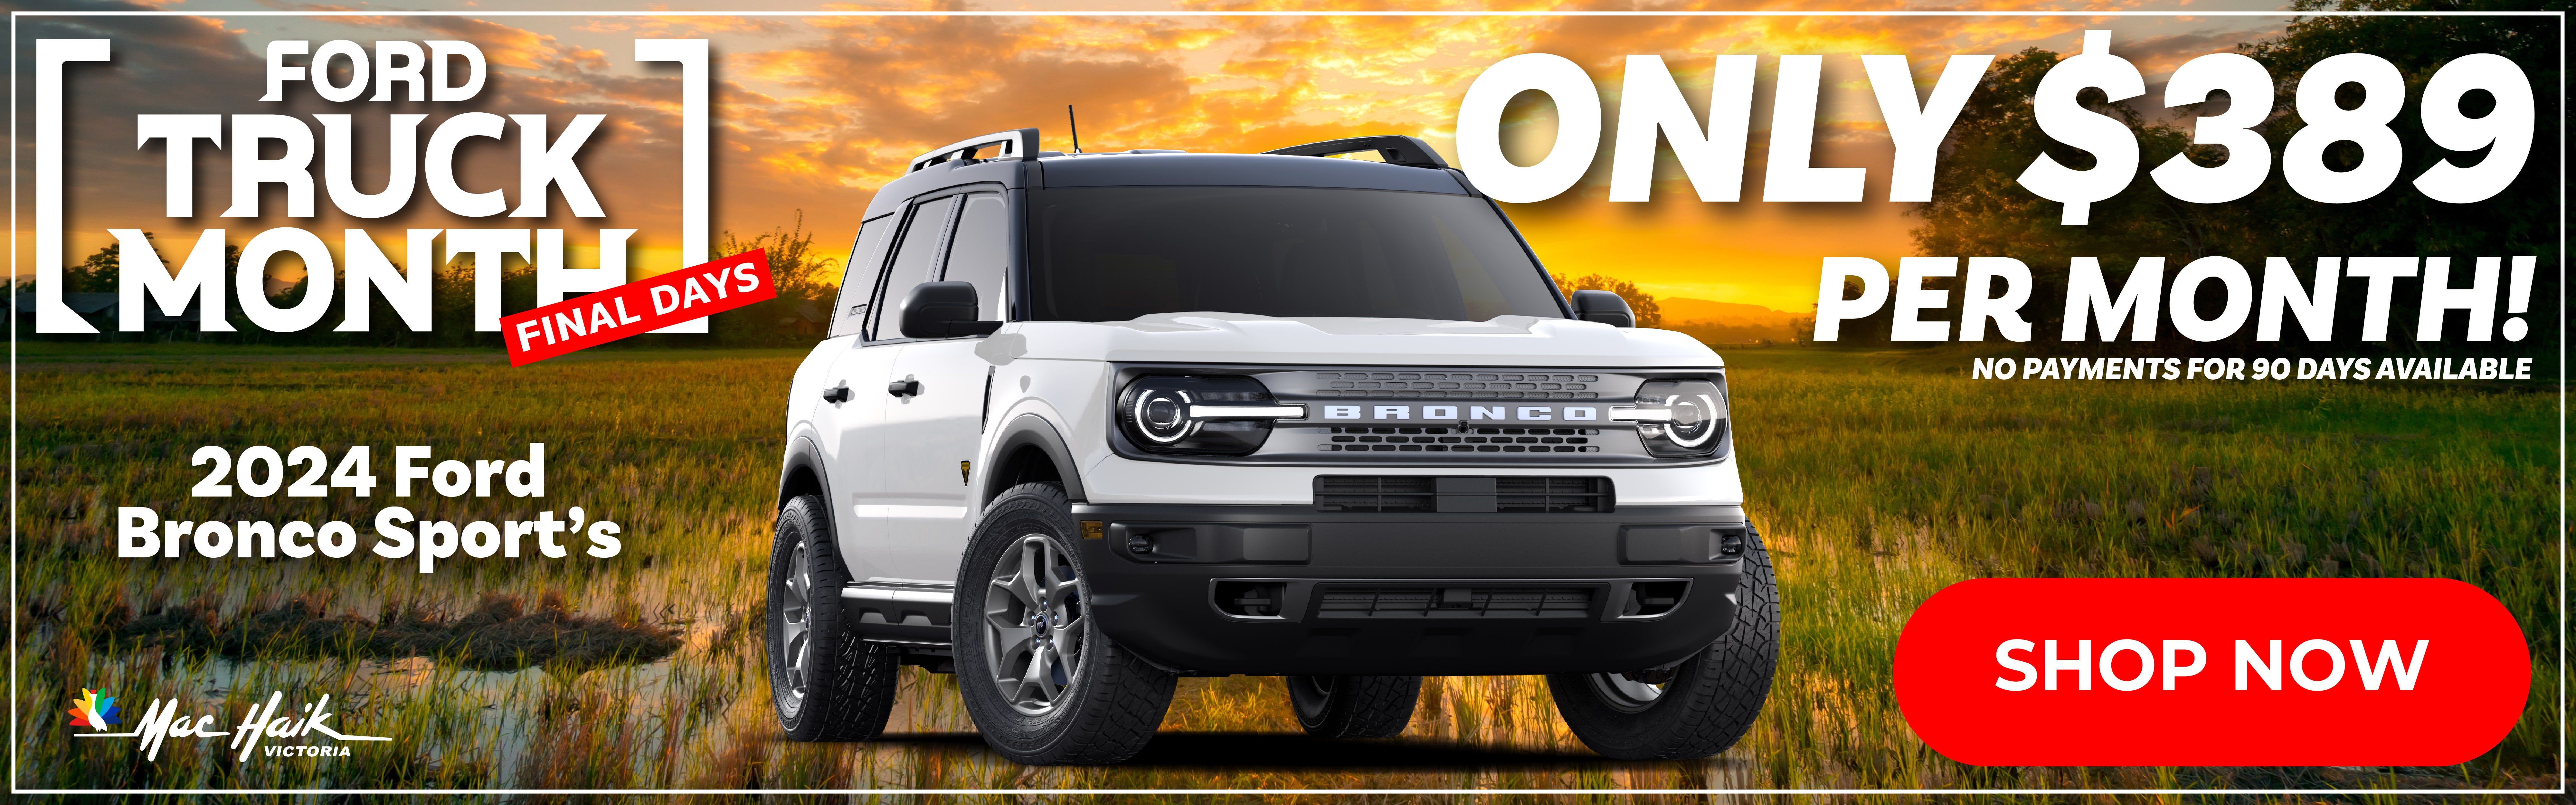 2024 Ford Bronco Sports